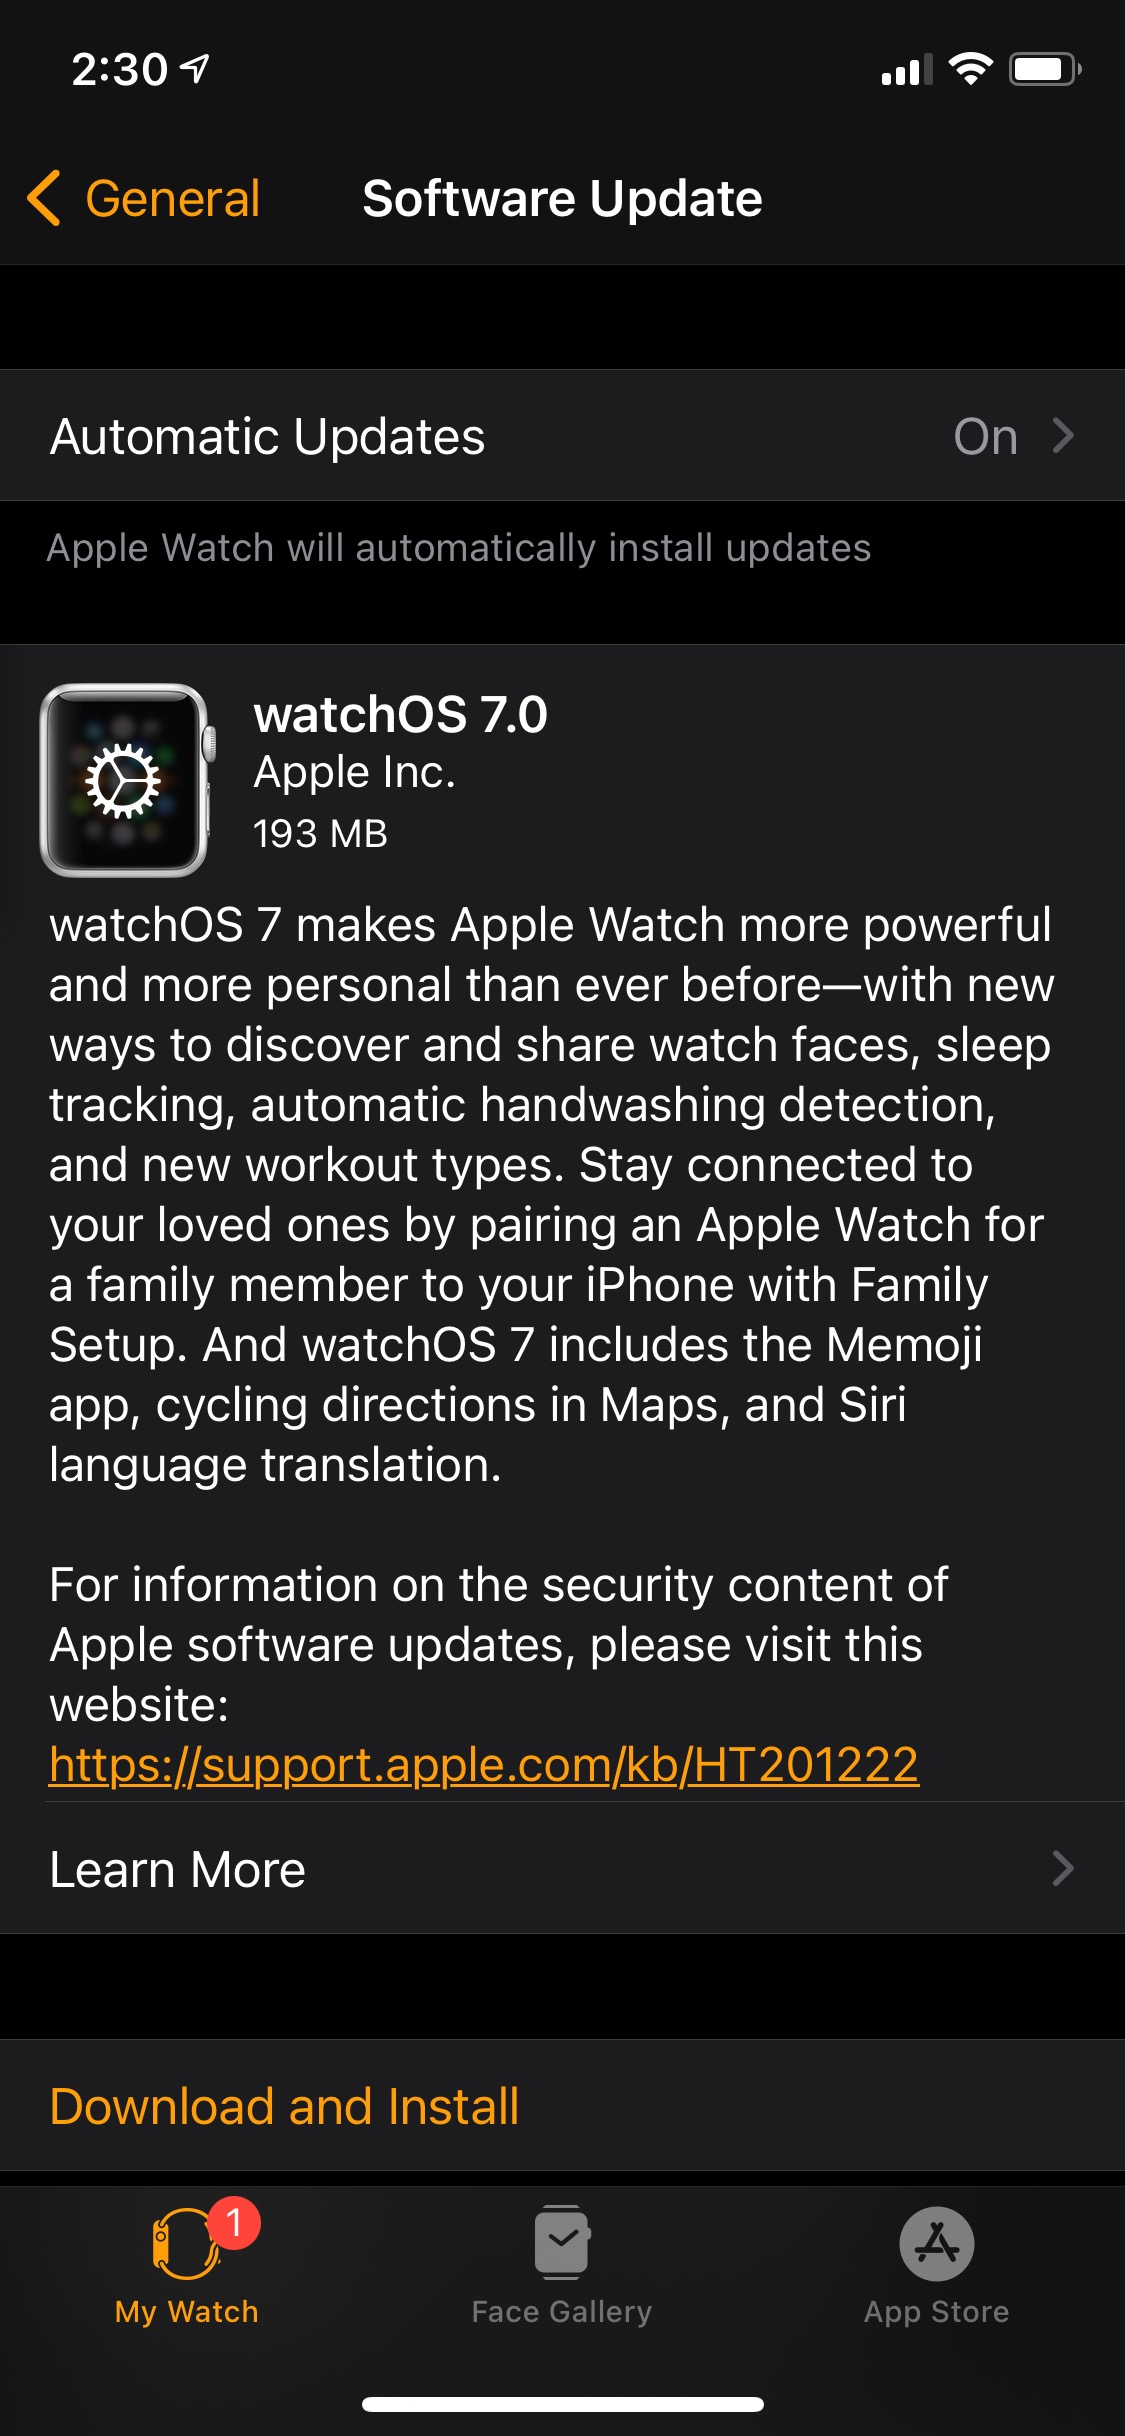 Here Are the Full Release Notes for watchOS 7 [Changelog]